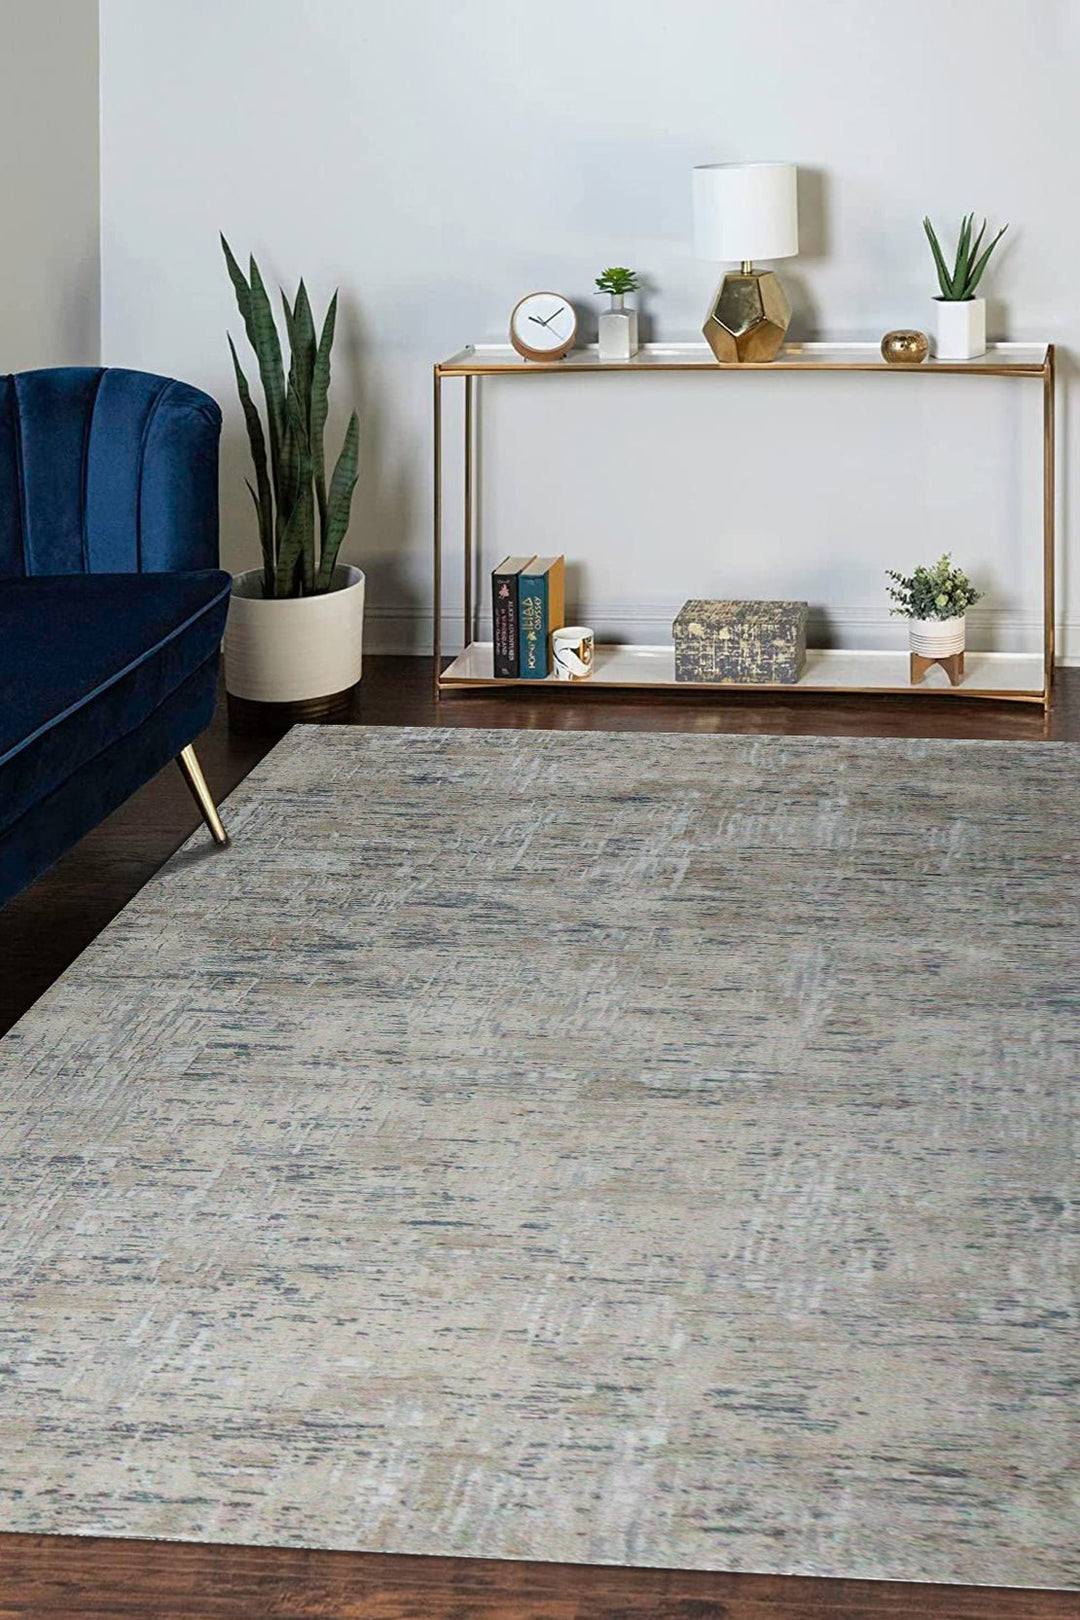 Turkish Modern Festival 1 Rug - 6.5 x 9.8 FT - Gray - Sleek and Minimalist for Chic Interiors - V Surfaces